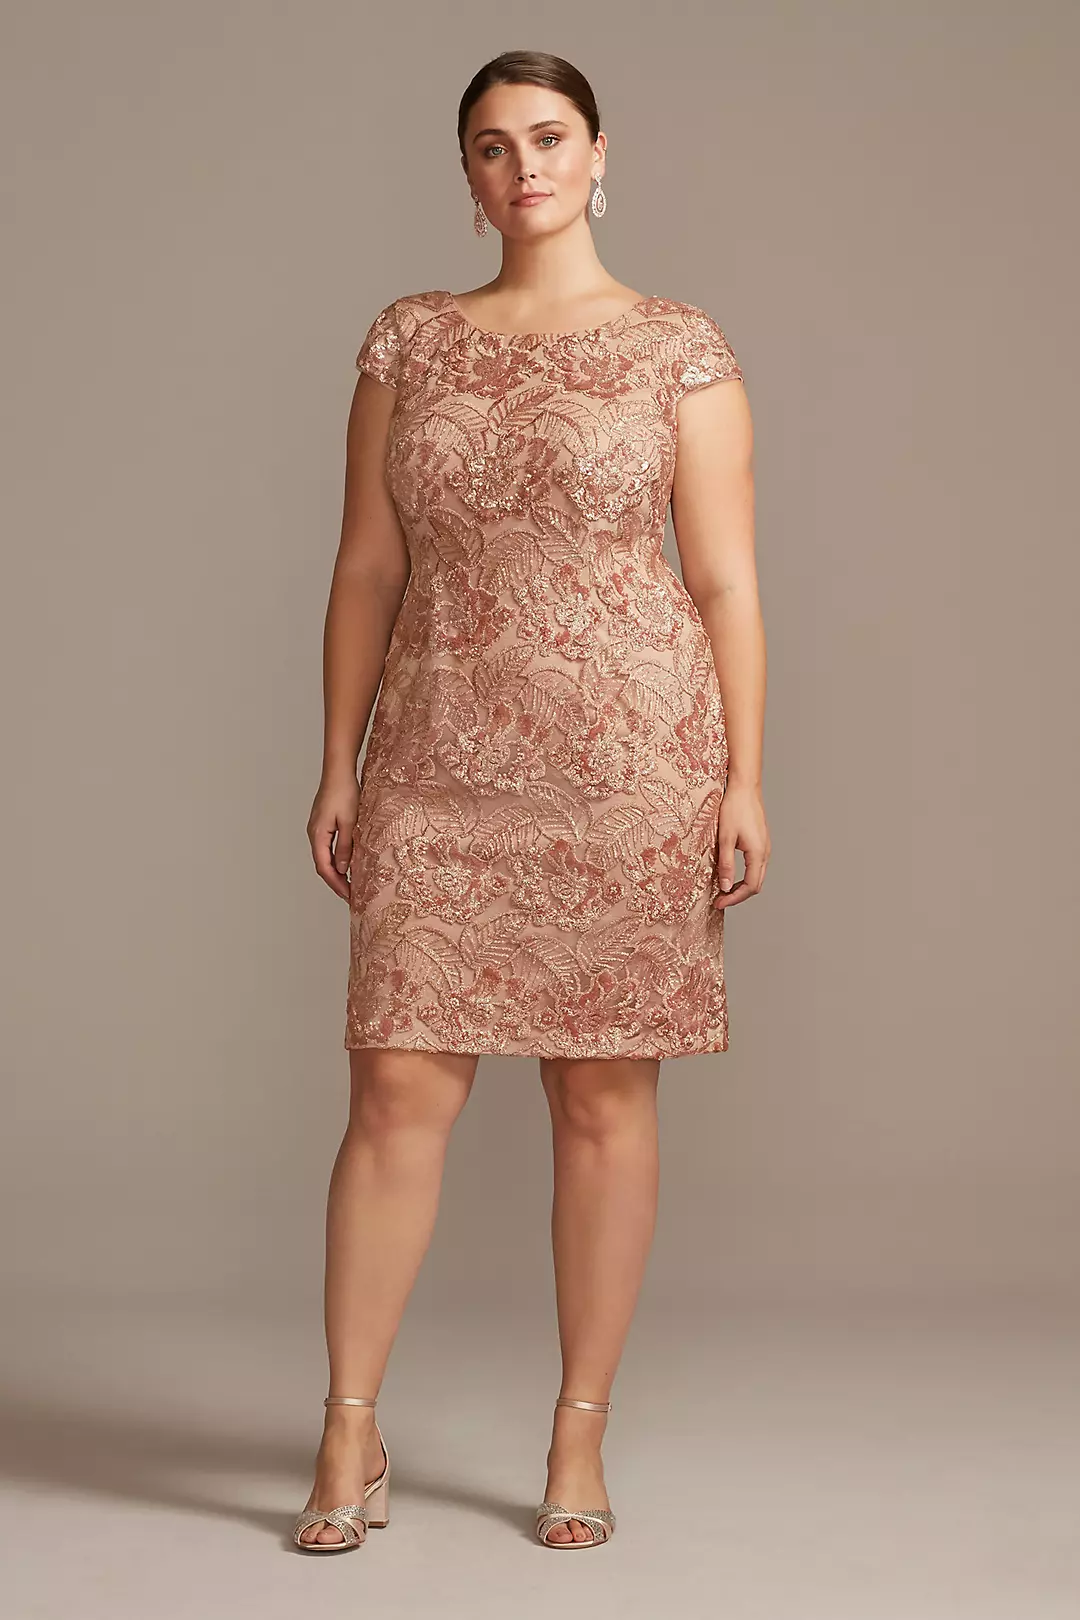 Sequin Lace Plus Size Sheath with Cap Sleeves Image